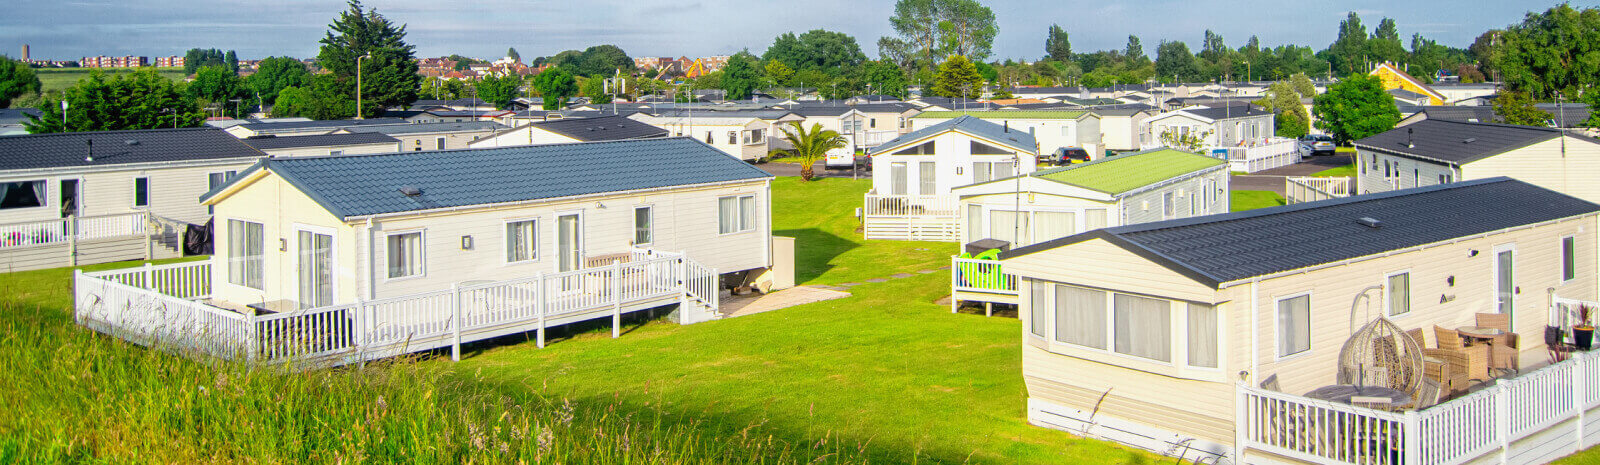 Rows of mobile homes